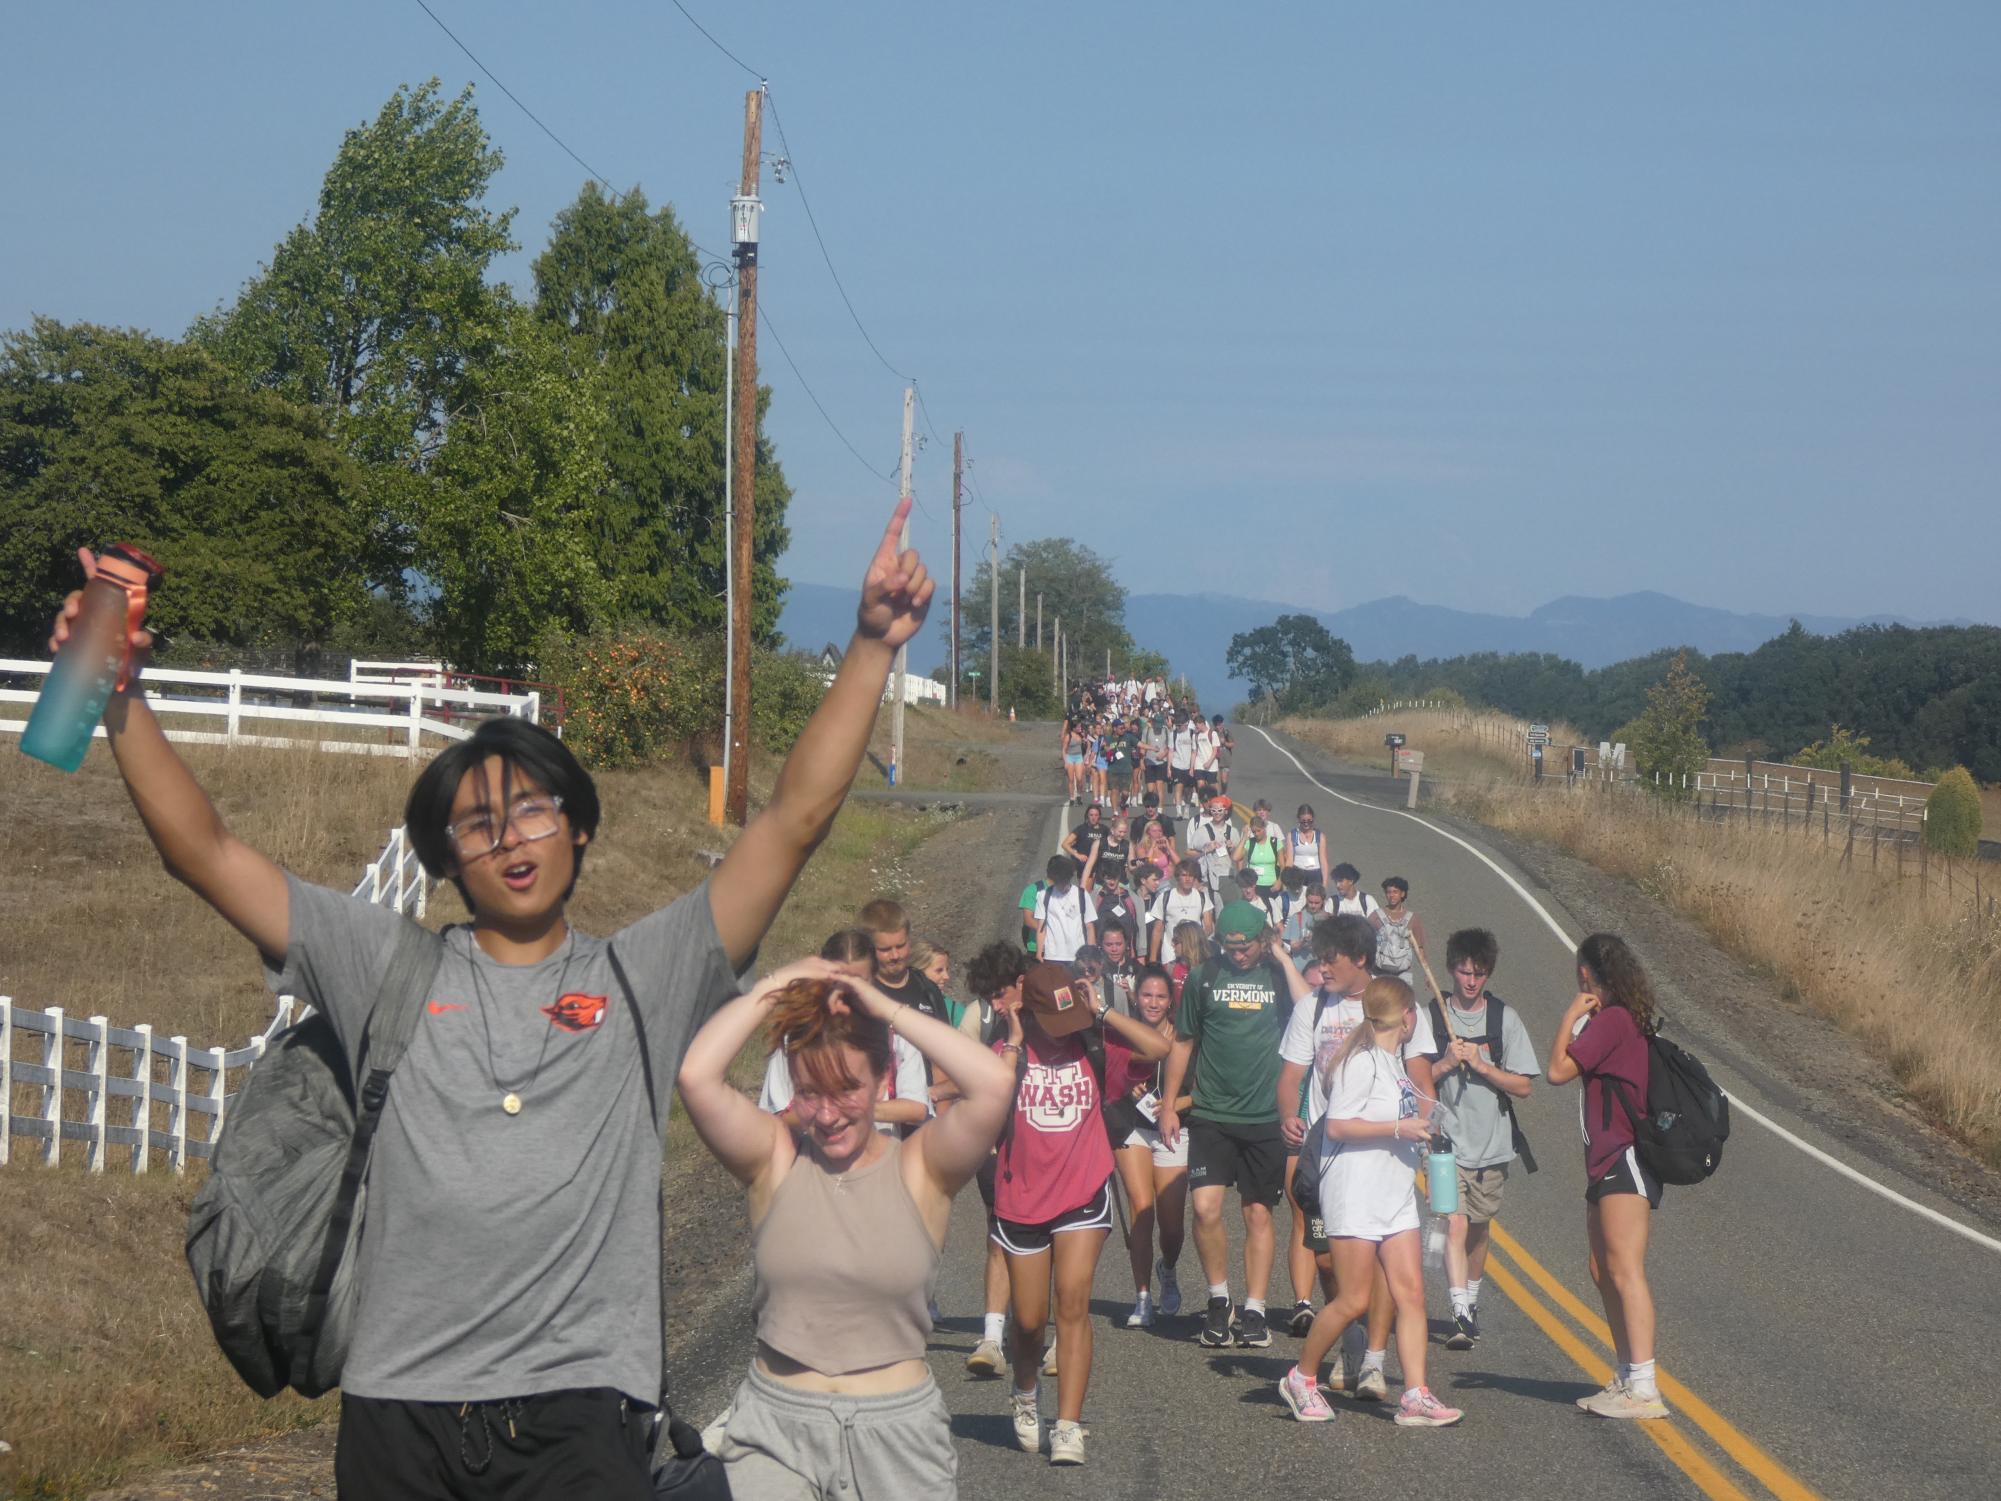 Dustin Doherty cheering on his last steps of the pilgrimage!